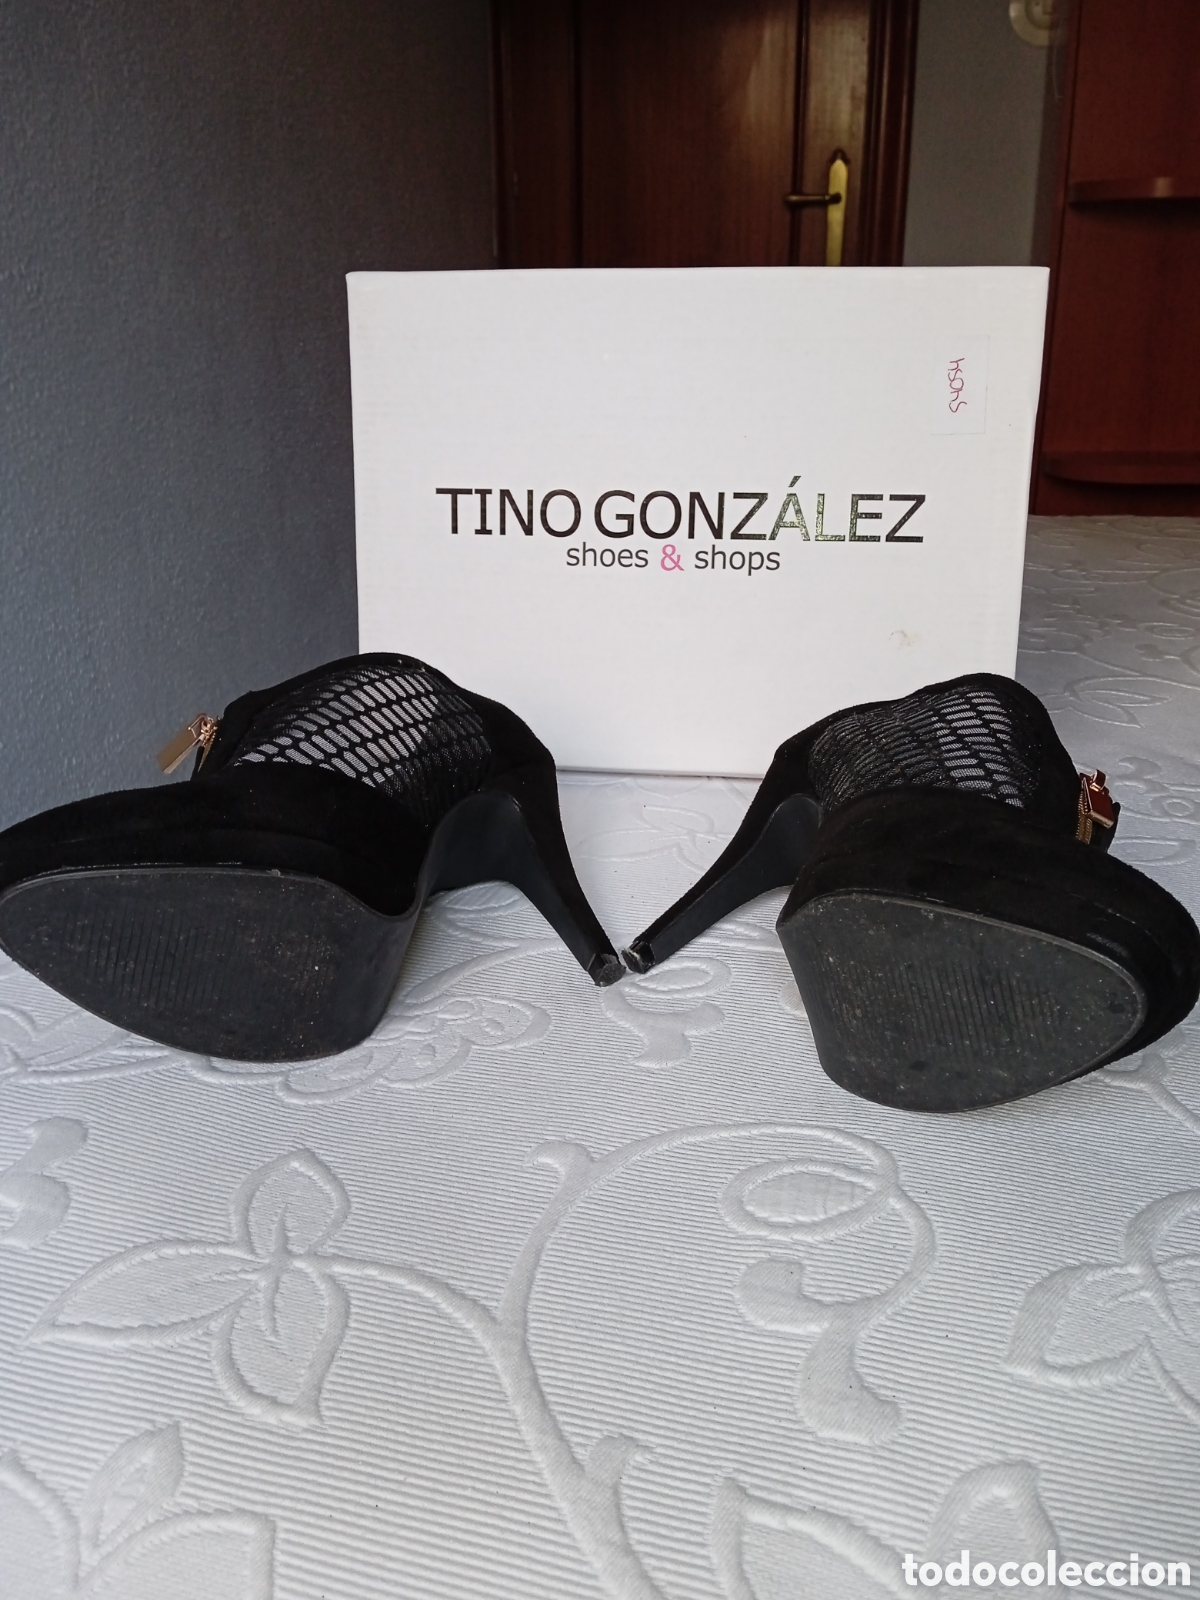 zapatos, tino gonzález ,n 37. - Buy Second-hand clothing and accessories todocoleccion